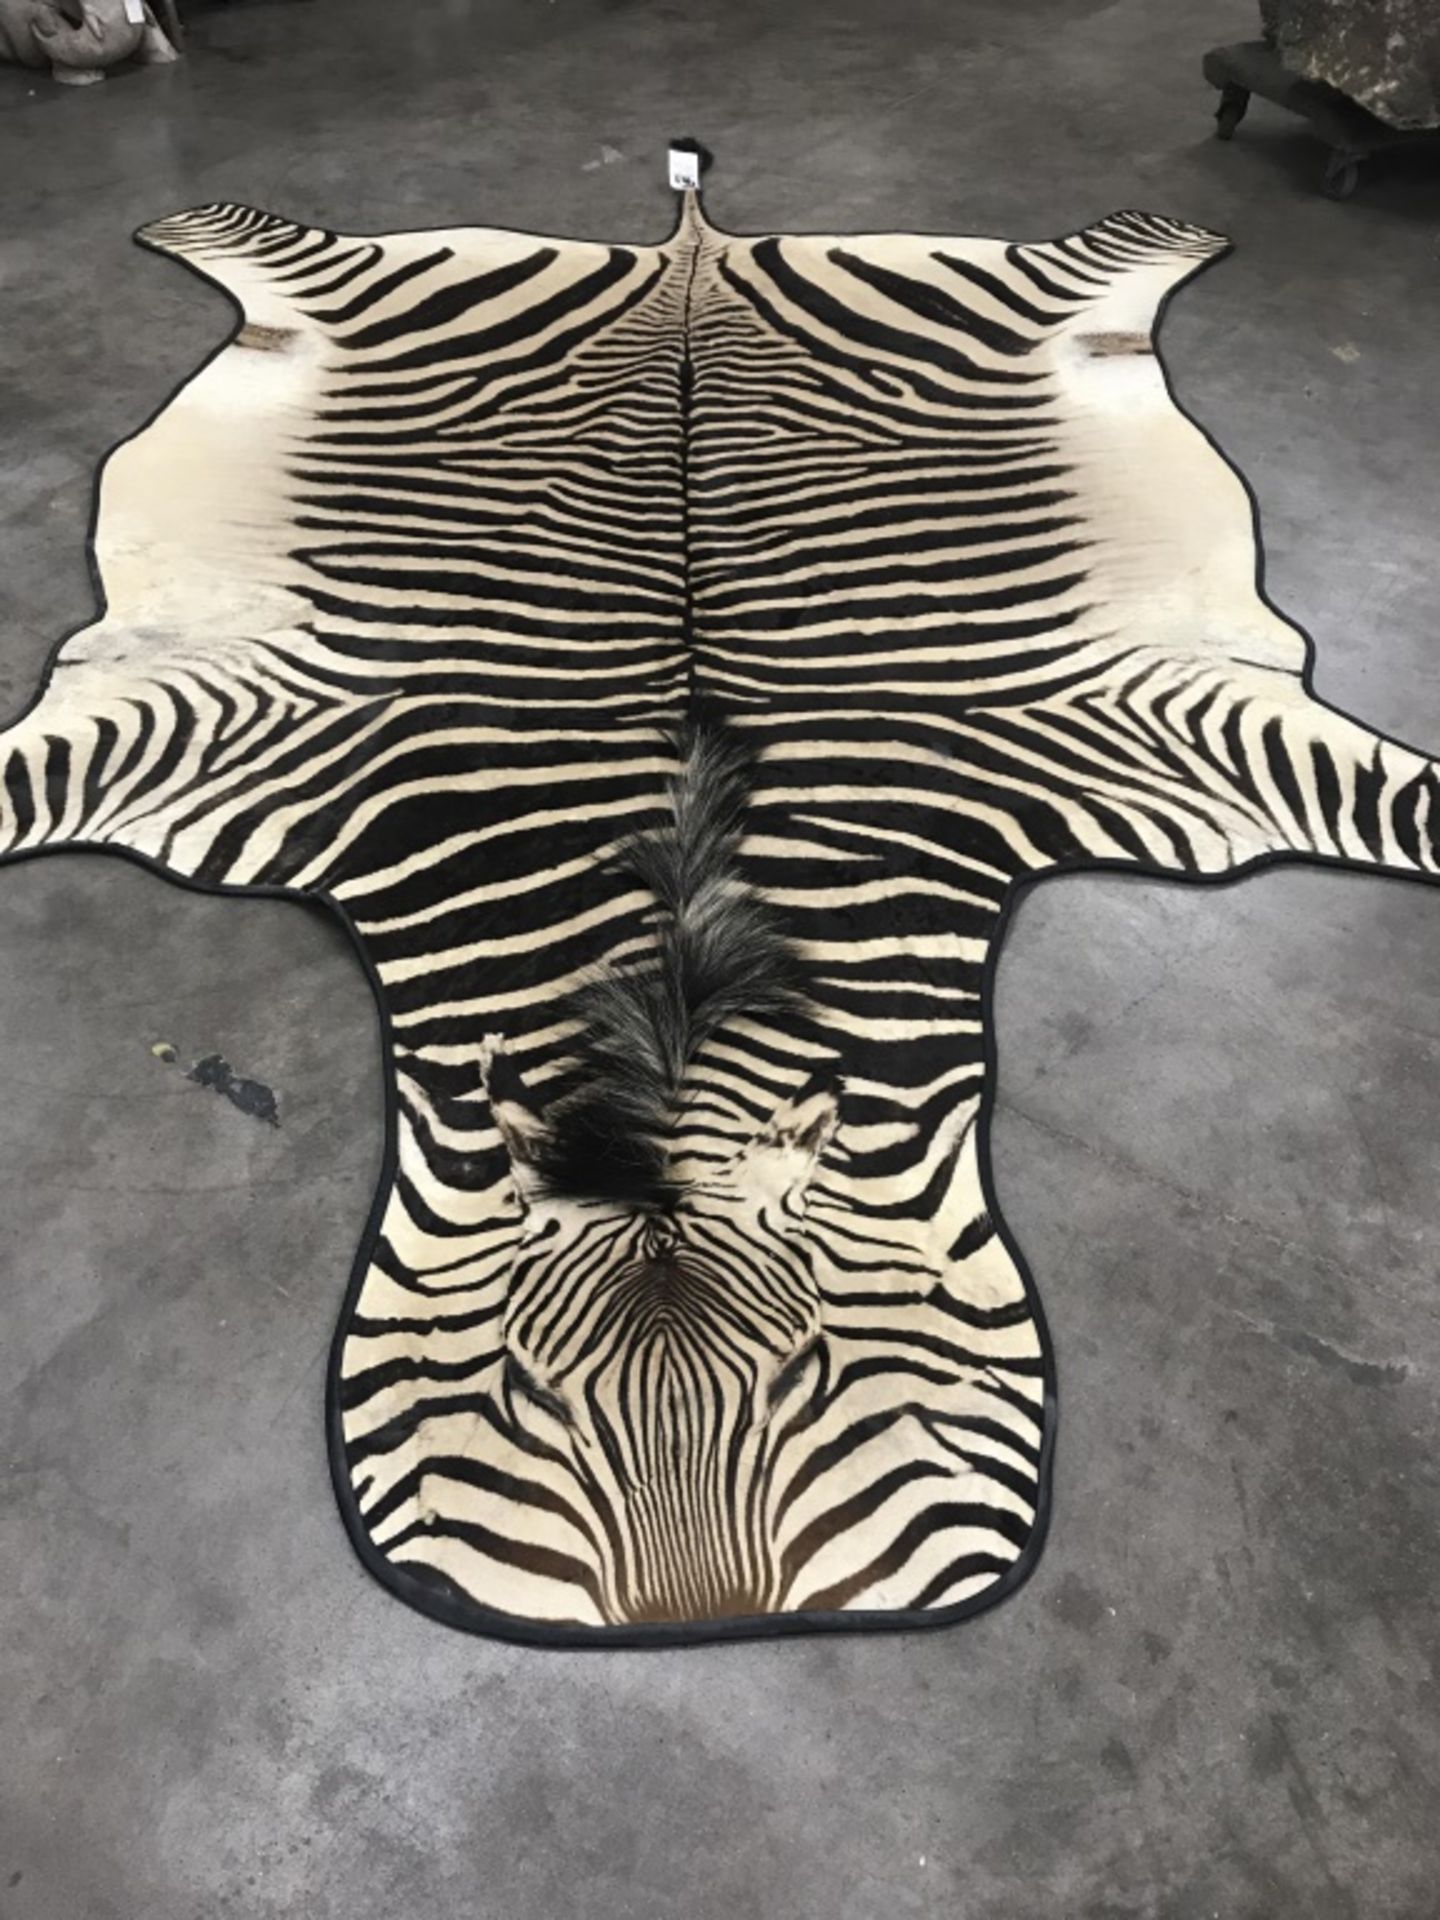 Very Nice Zebra Rug (TX Res. Only) - Image 4 of 13